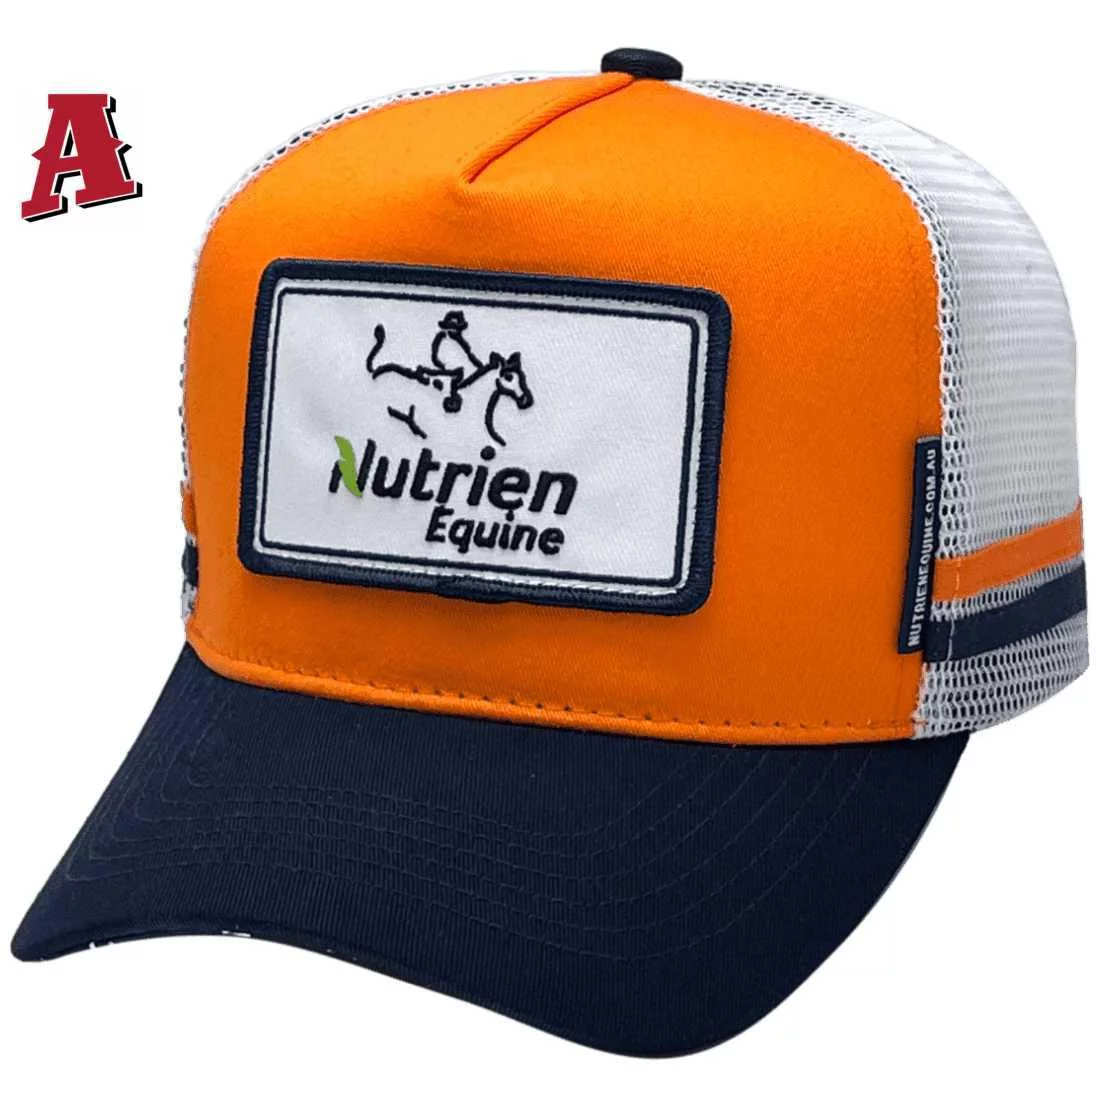 Nutrien Equine Tamworth NSW HP Midrange Aussie Trucker Hats with Australian Head Fit Crown and Double Side Bands and Sewn On Badge